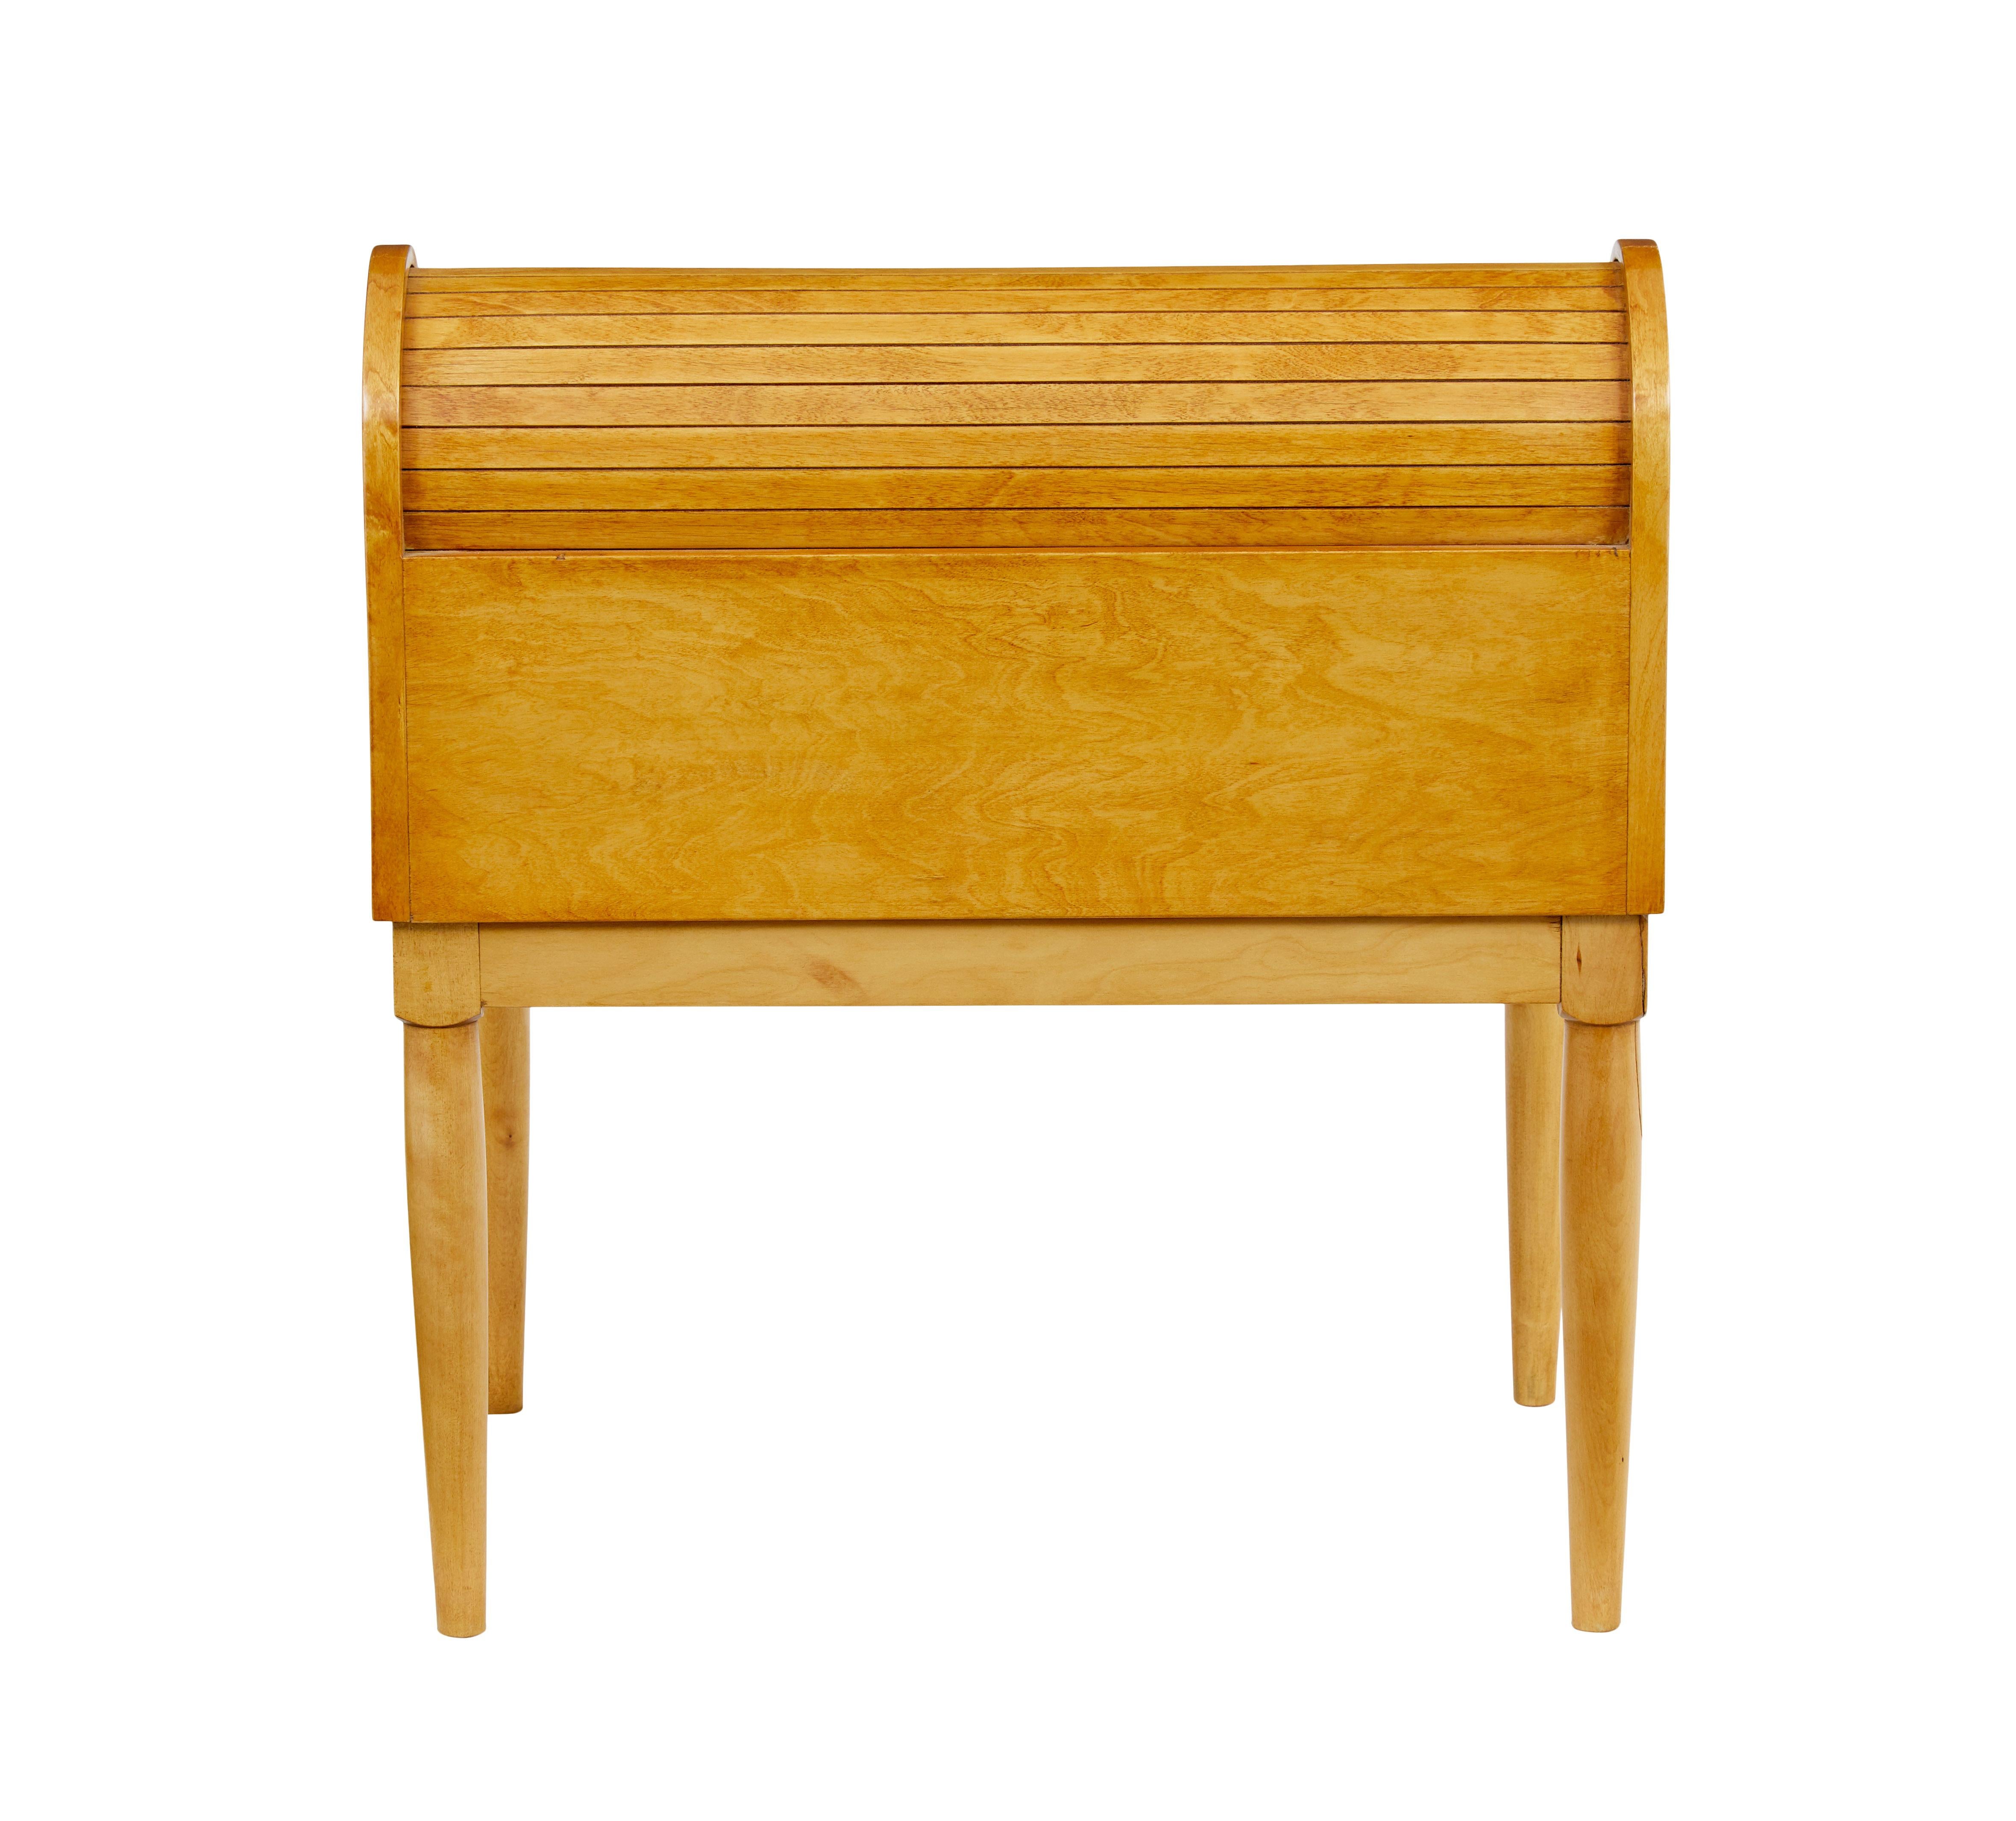 20th Century Mid 20th century birch tambour sewing box on stand For Sale